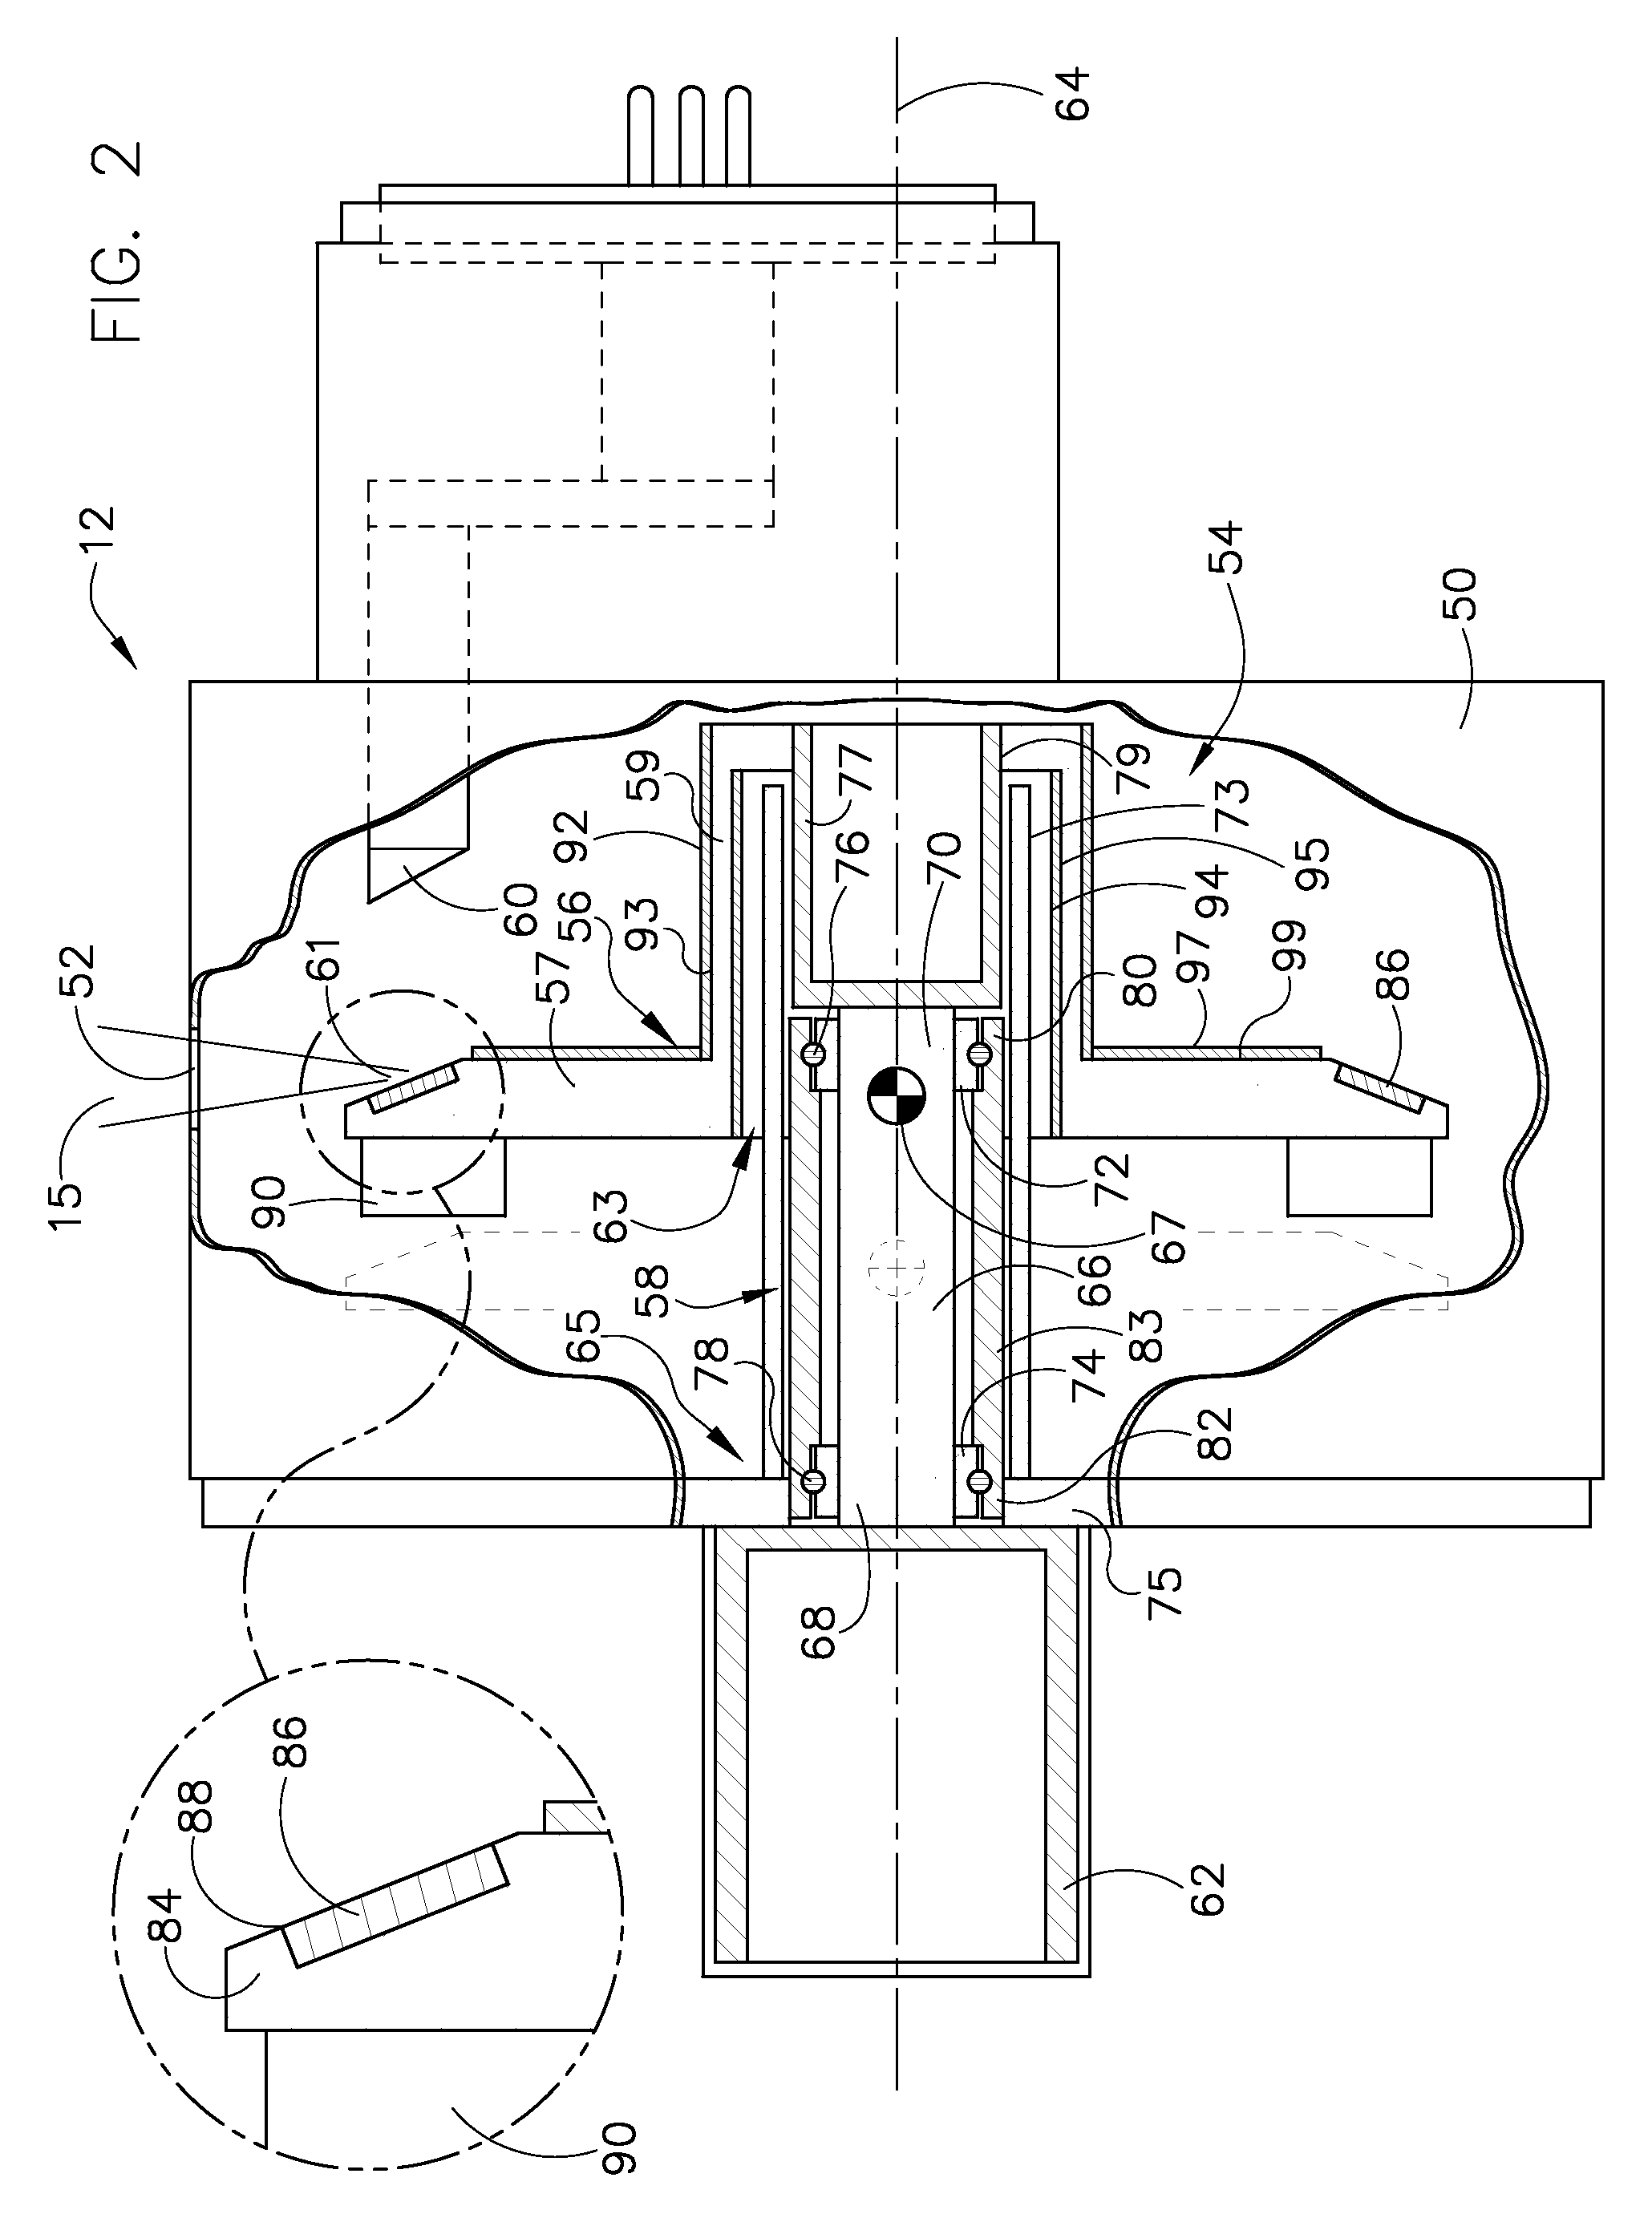 Method and apparatus for increasing heat radiation from an x-ray tube target shaft